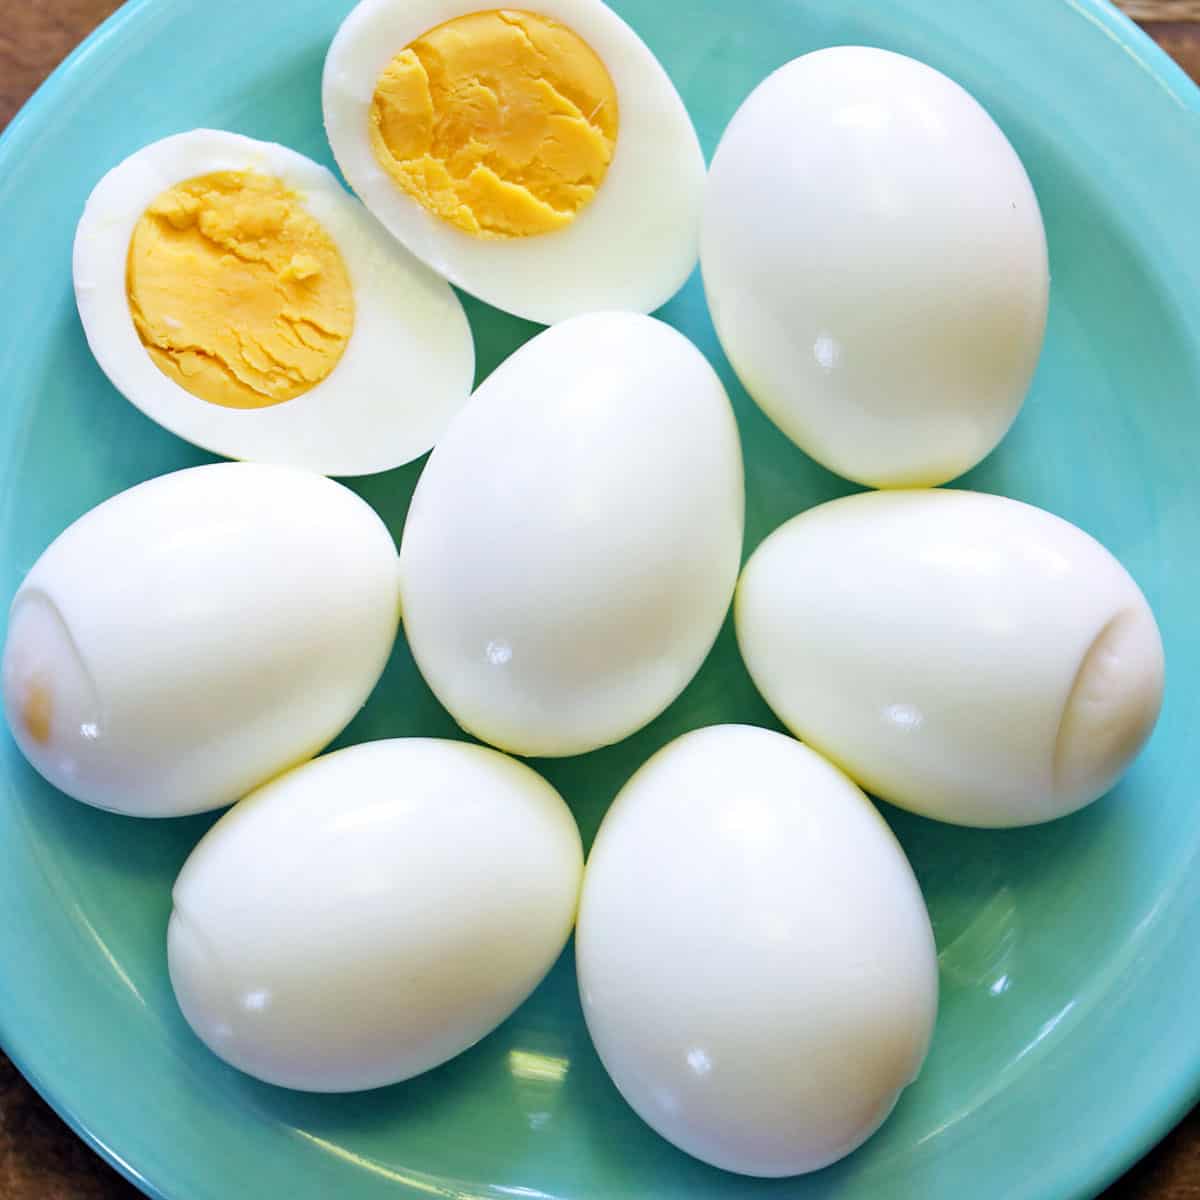 Hard-boiled eggs are served on a turquoise plate.